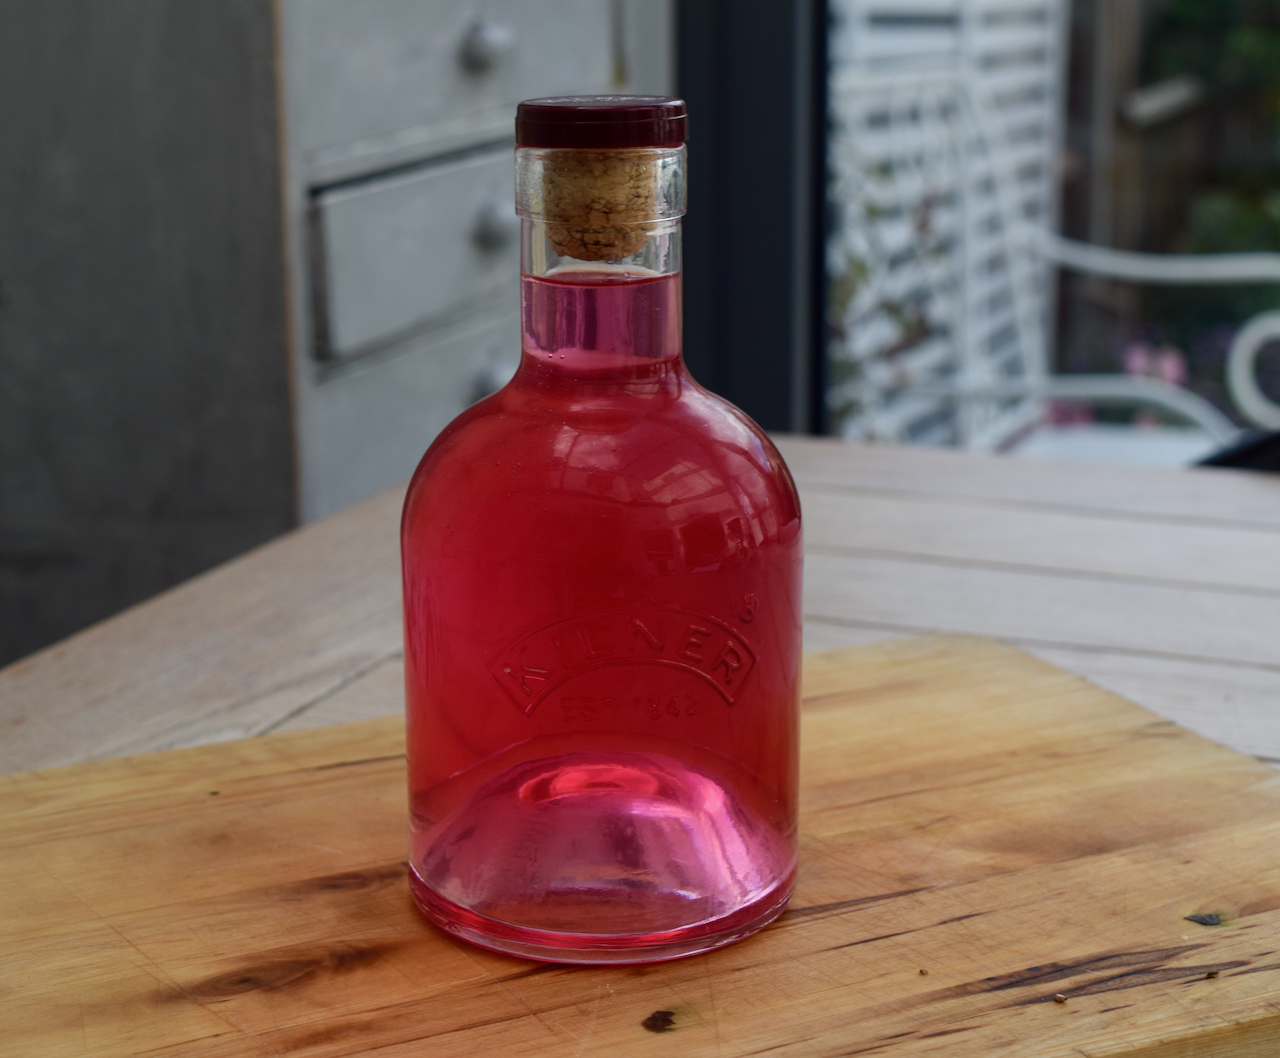 Homemade Rose Syrup recipe from Lucy Loves Food Blog